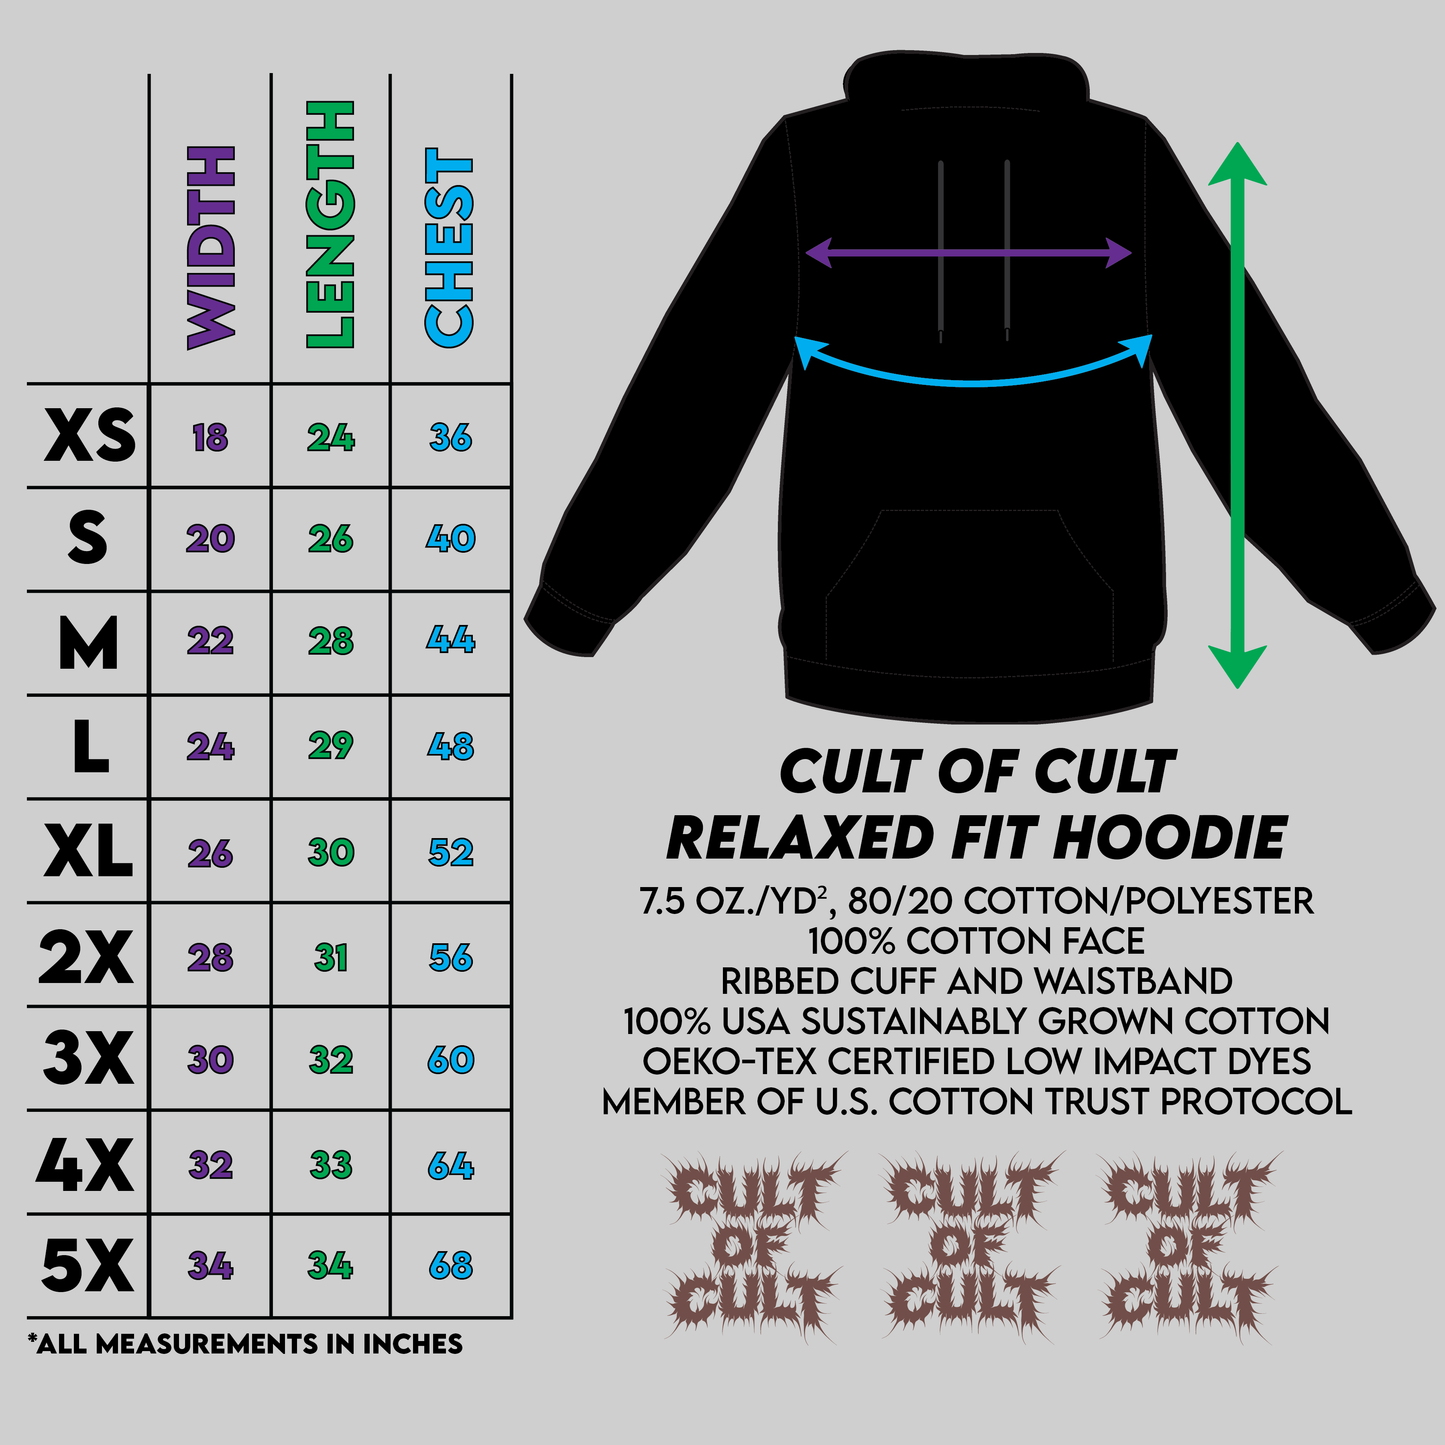 Sizing chart for Cult of Cult hoodies.